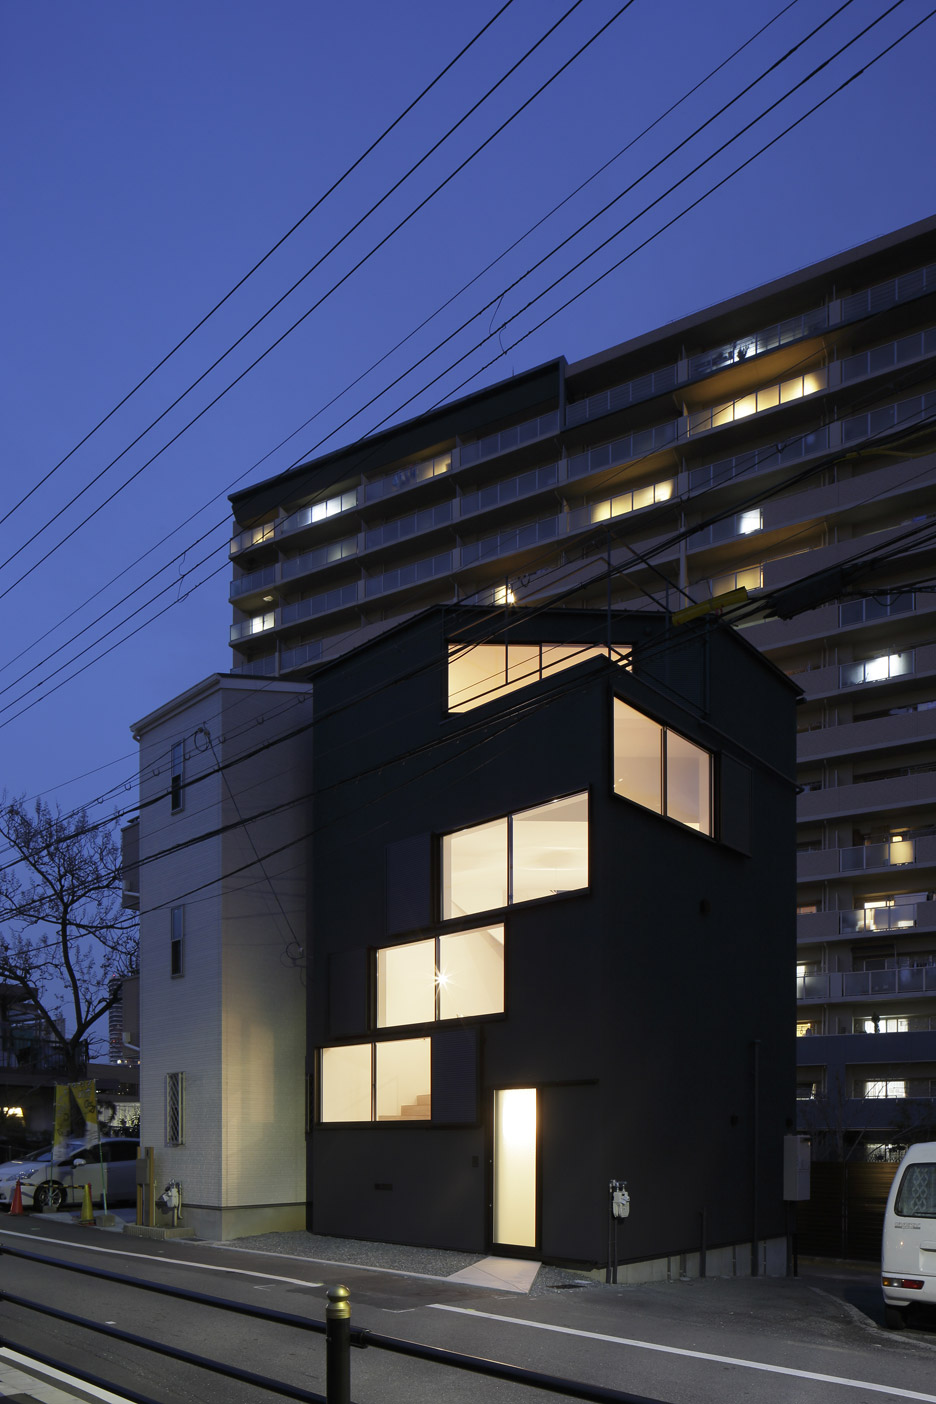 Windows Spiral Towards The Roof Of Osaka House By Alphaville Architects